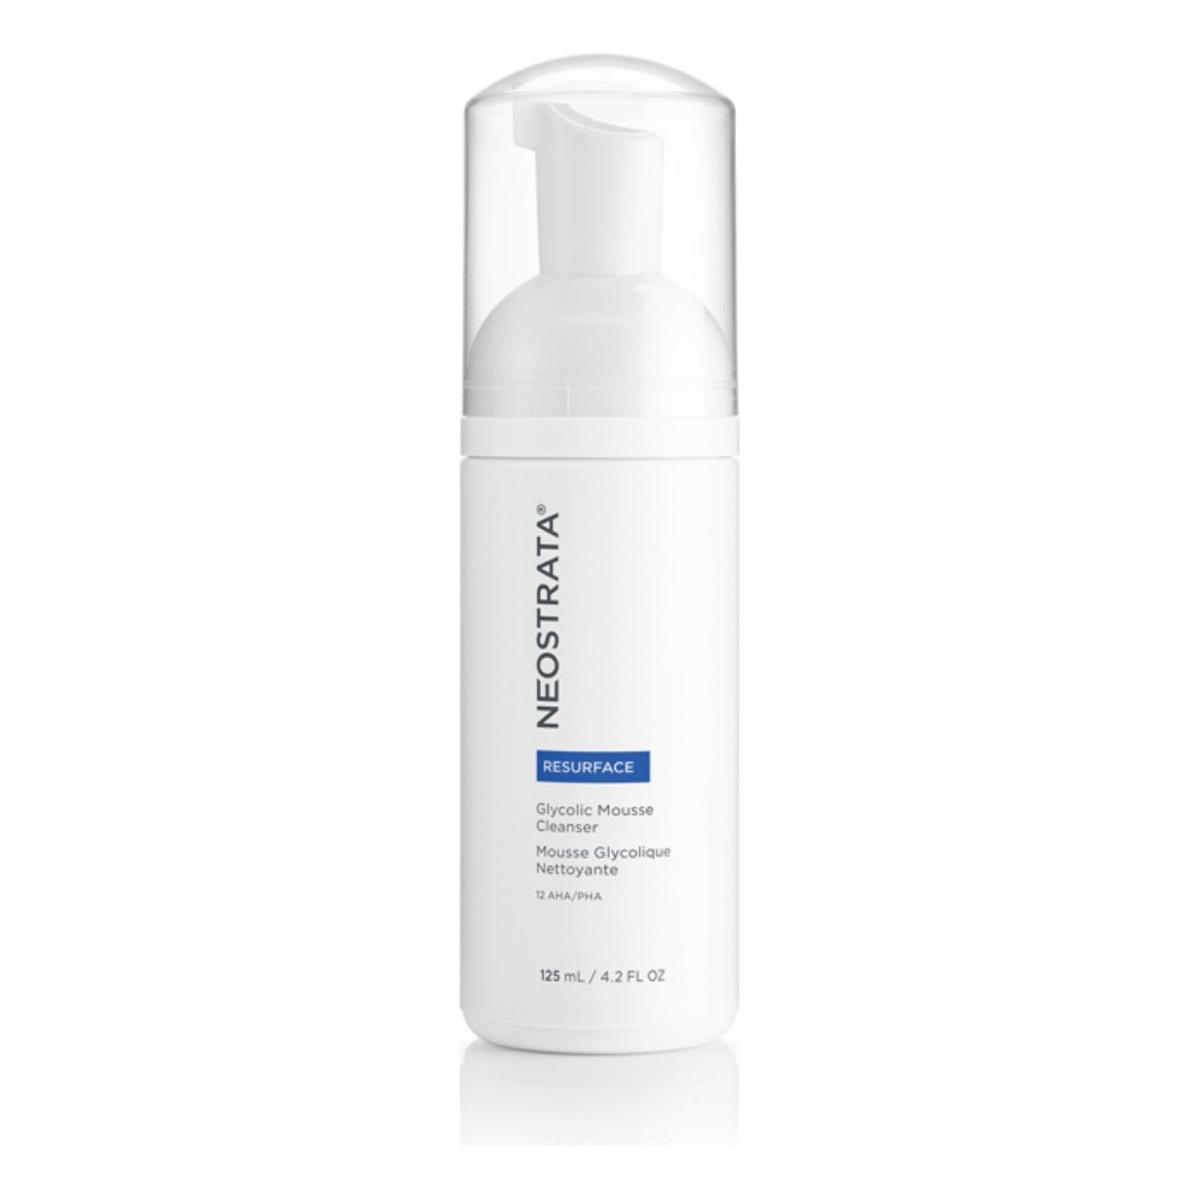 Neostrata | Resurface Glycolic Mousse Cleanser | 125ml - DG International Ventures Limited